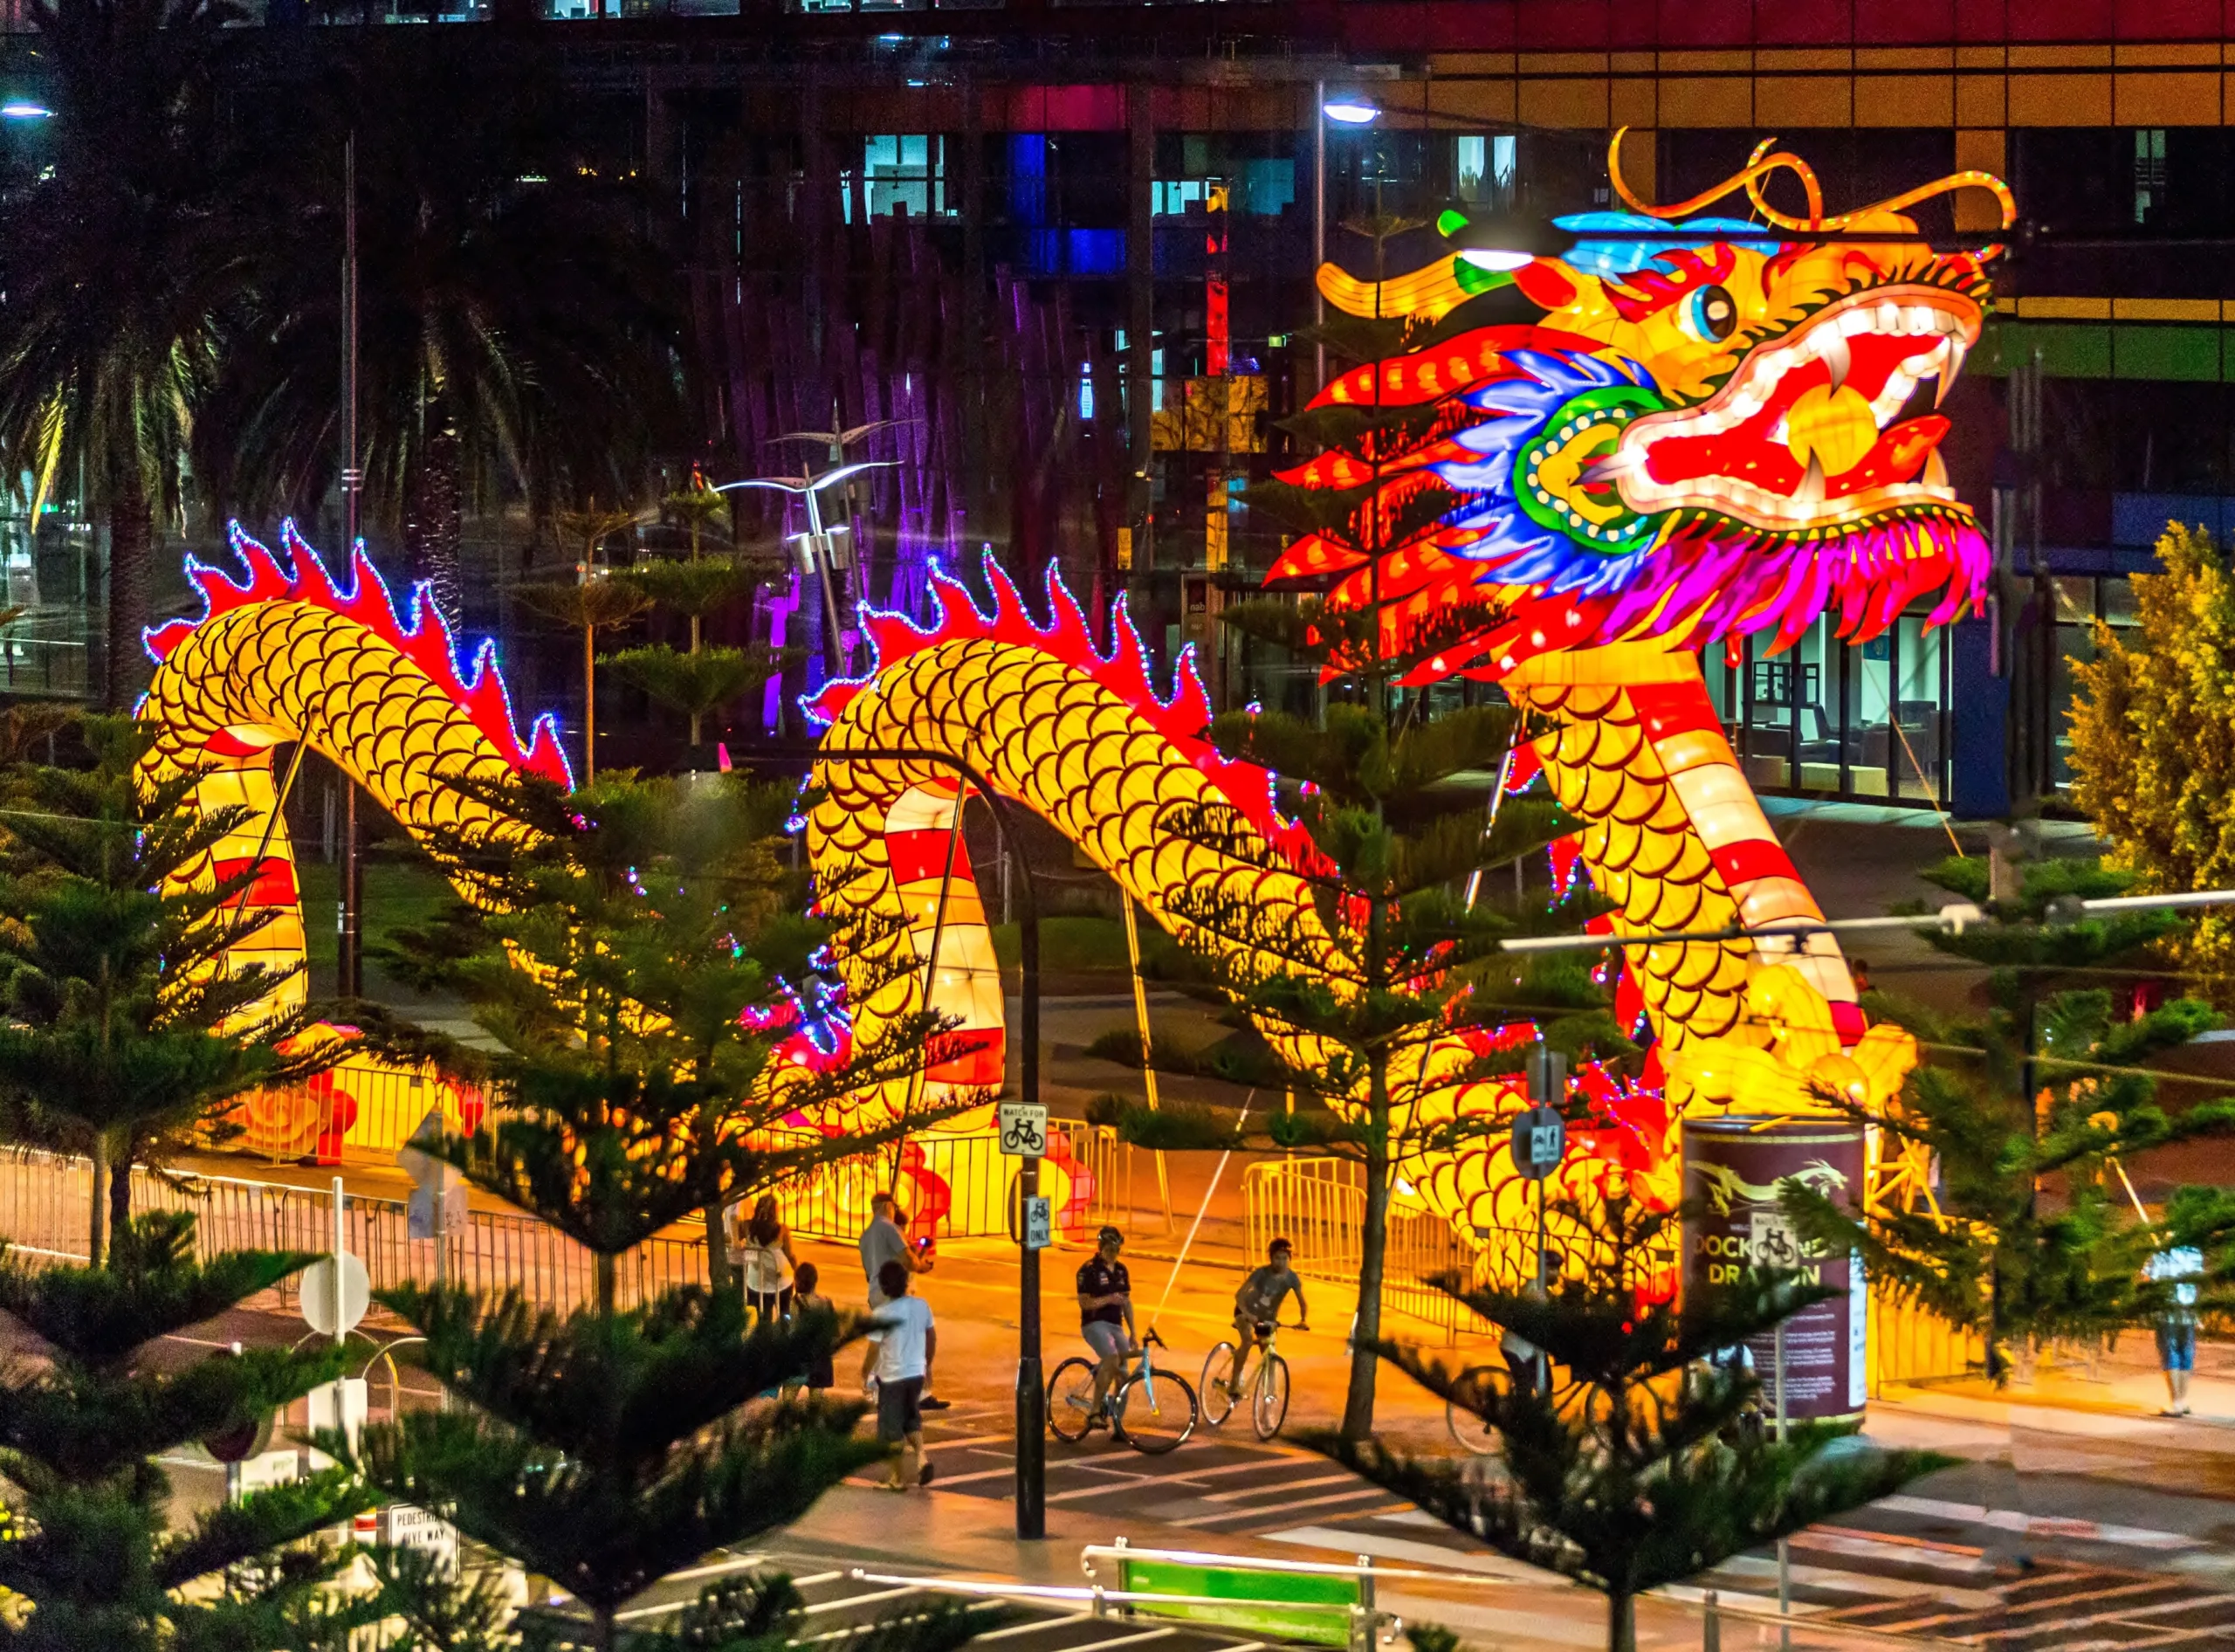 A group of people wearing traditional Asian attire celebrating Lunar New Year with dragon dance and fireworks.